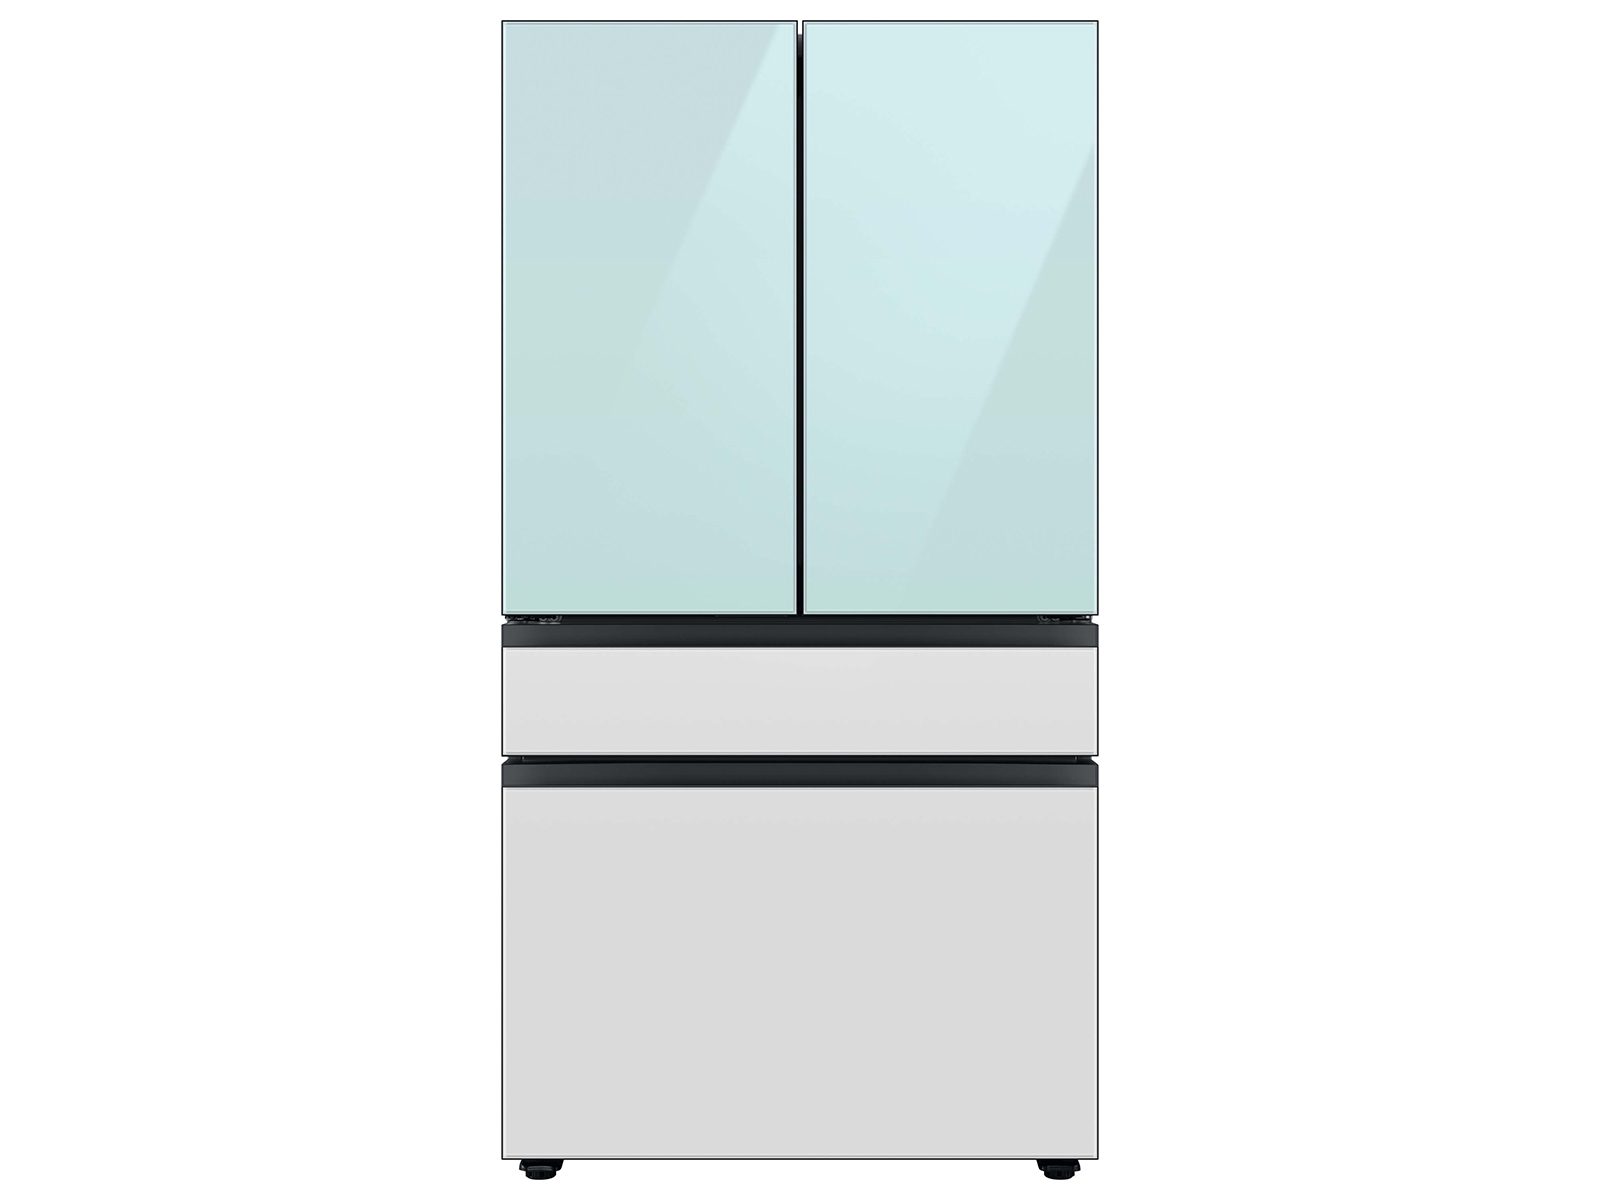 Thumbnail image of Bespoke 4-Door French Door Refrigerator (23 cu. ft.) with AutoFill Water Pitcher and Customizable Door Panel Colors in Morning Blue Glass Top Panels and White Glass Middle and Bottom Panels